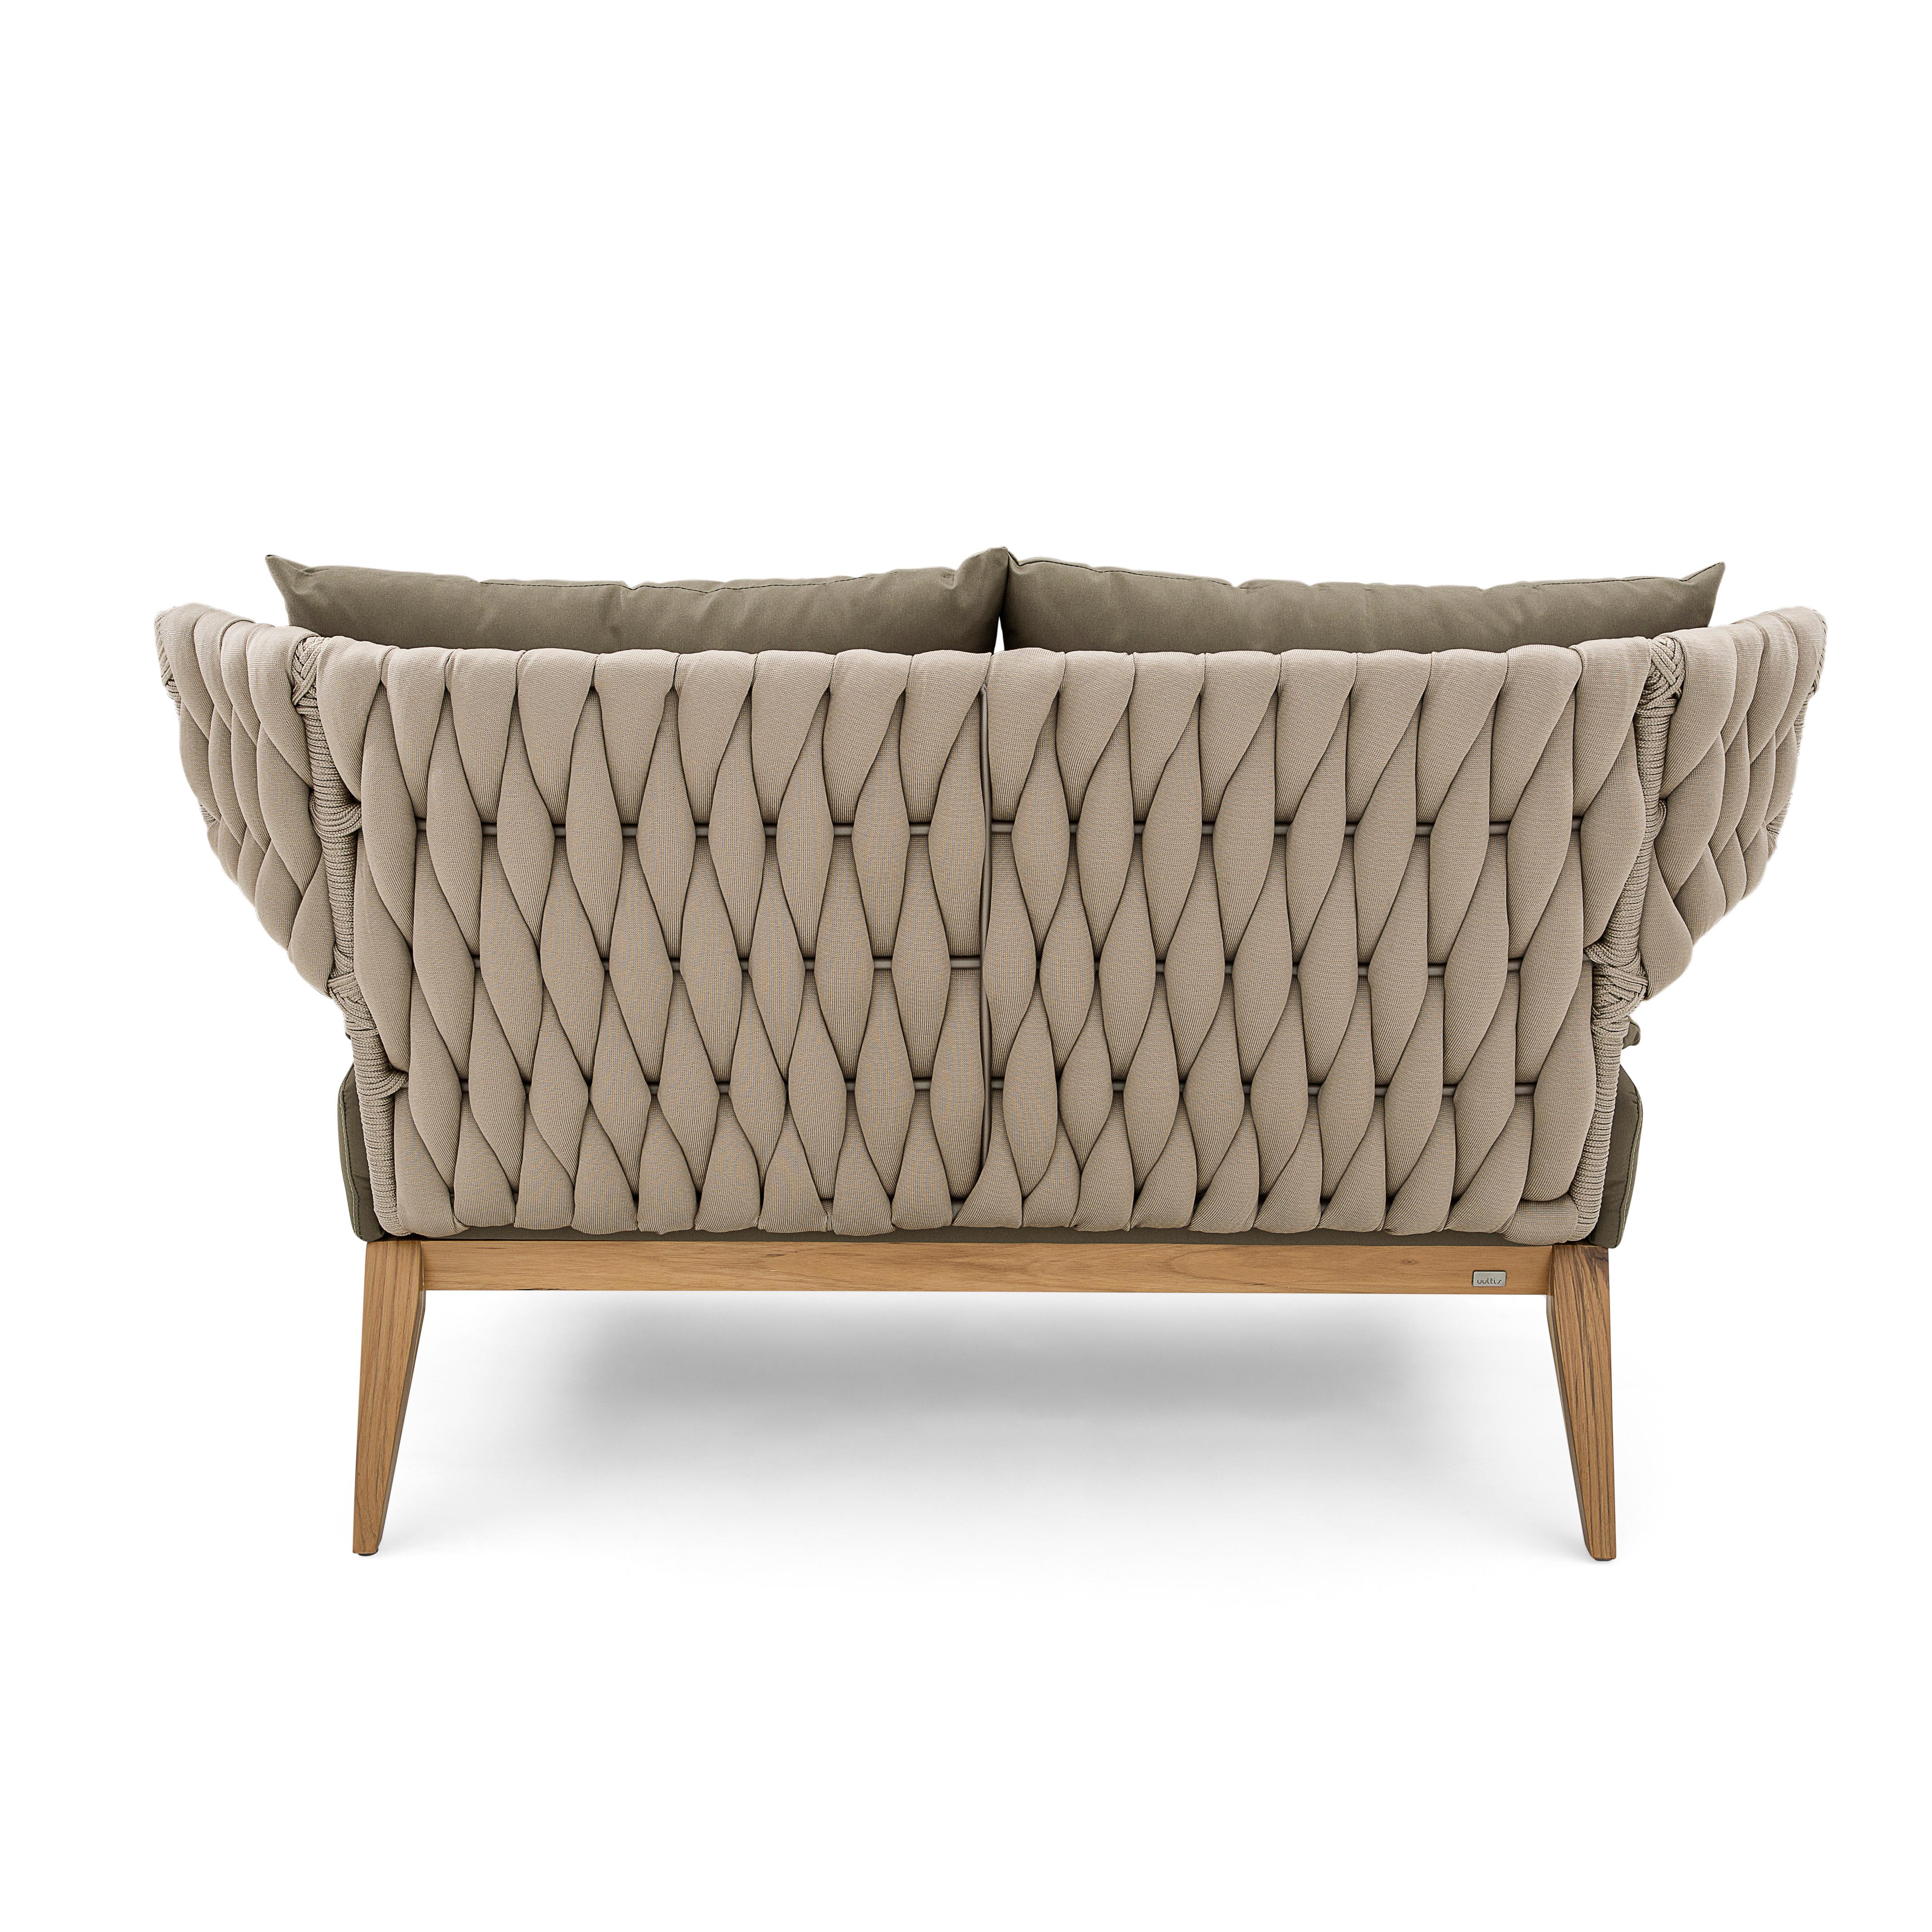 Brazilian Beluga Outdoor Loveseat in Olive Green fabric and Teak wood For Sale